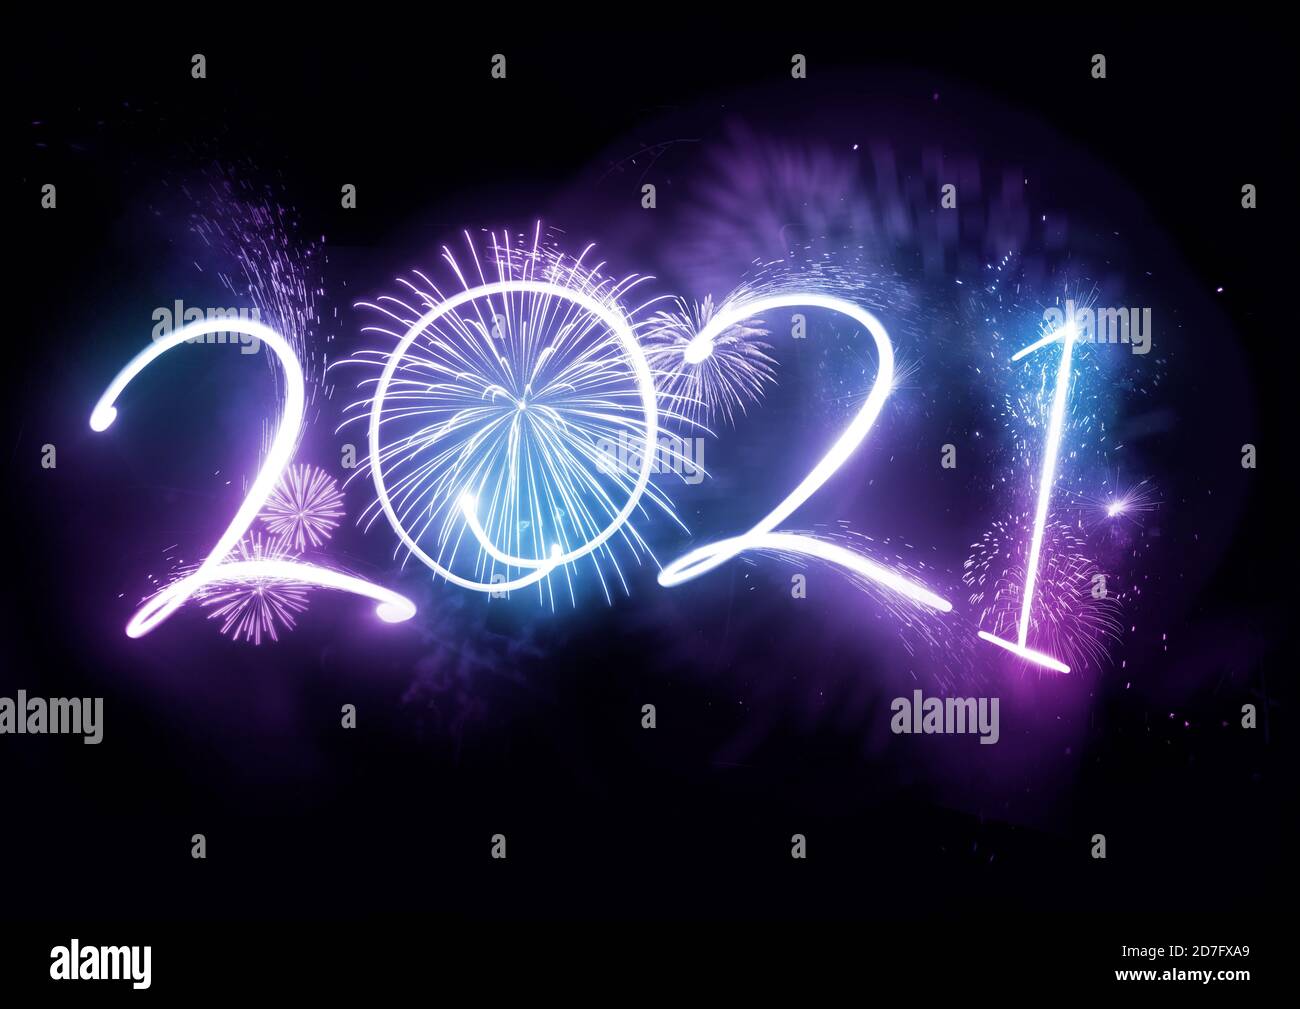 Welcoming the year 2021 displayed with fireworks and strobe lights. New year celebration concept. Stock Photo